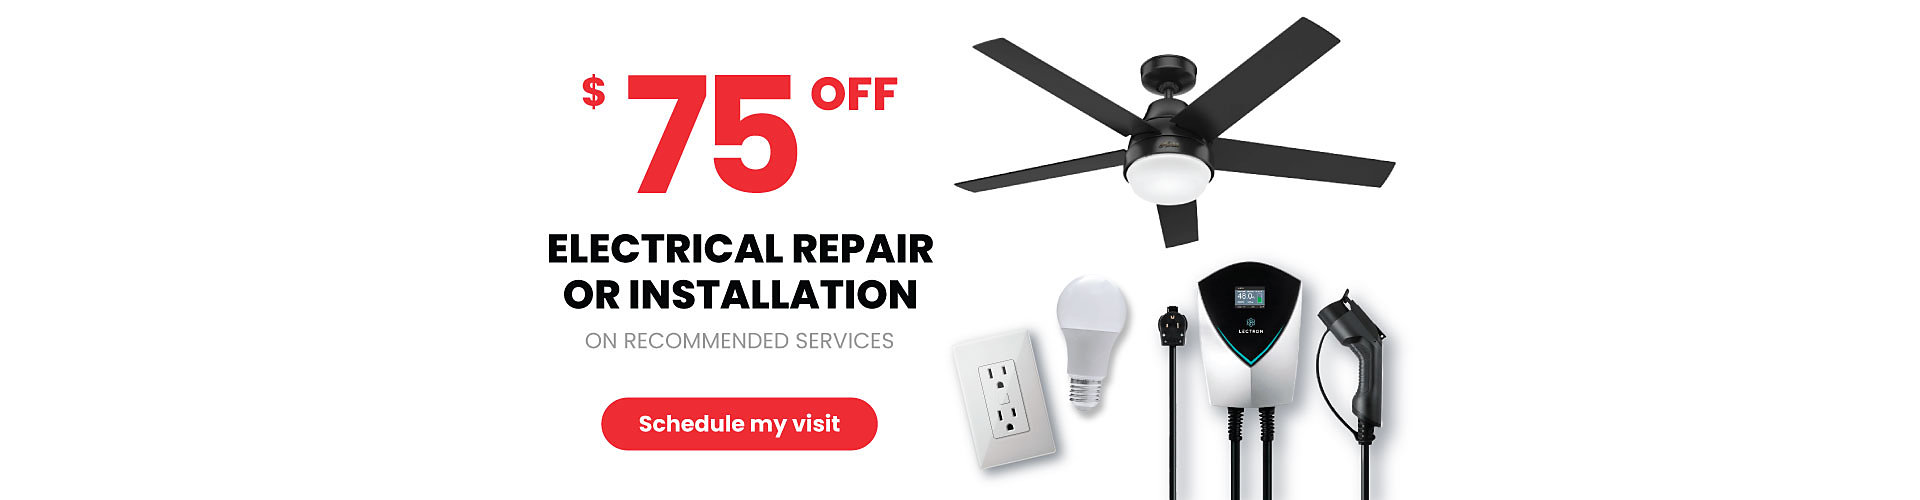 75 OFF Electrical Repair or Installation